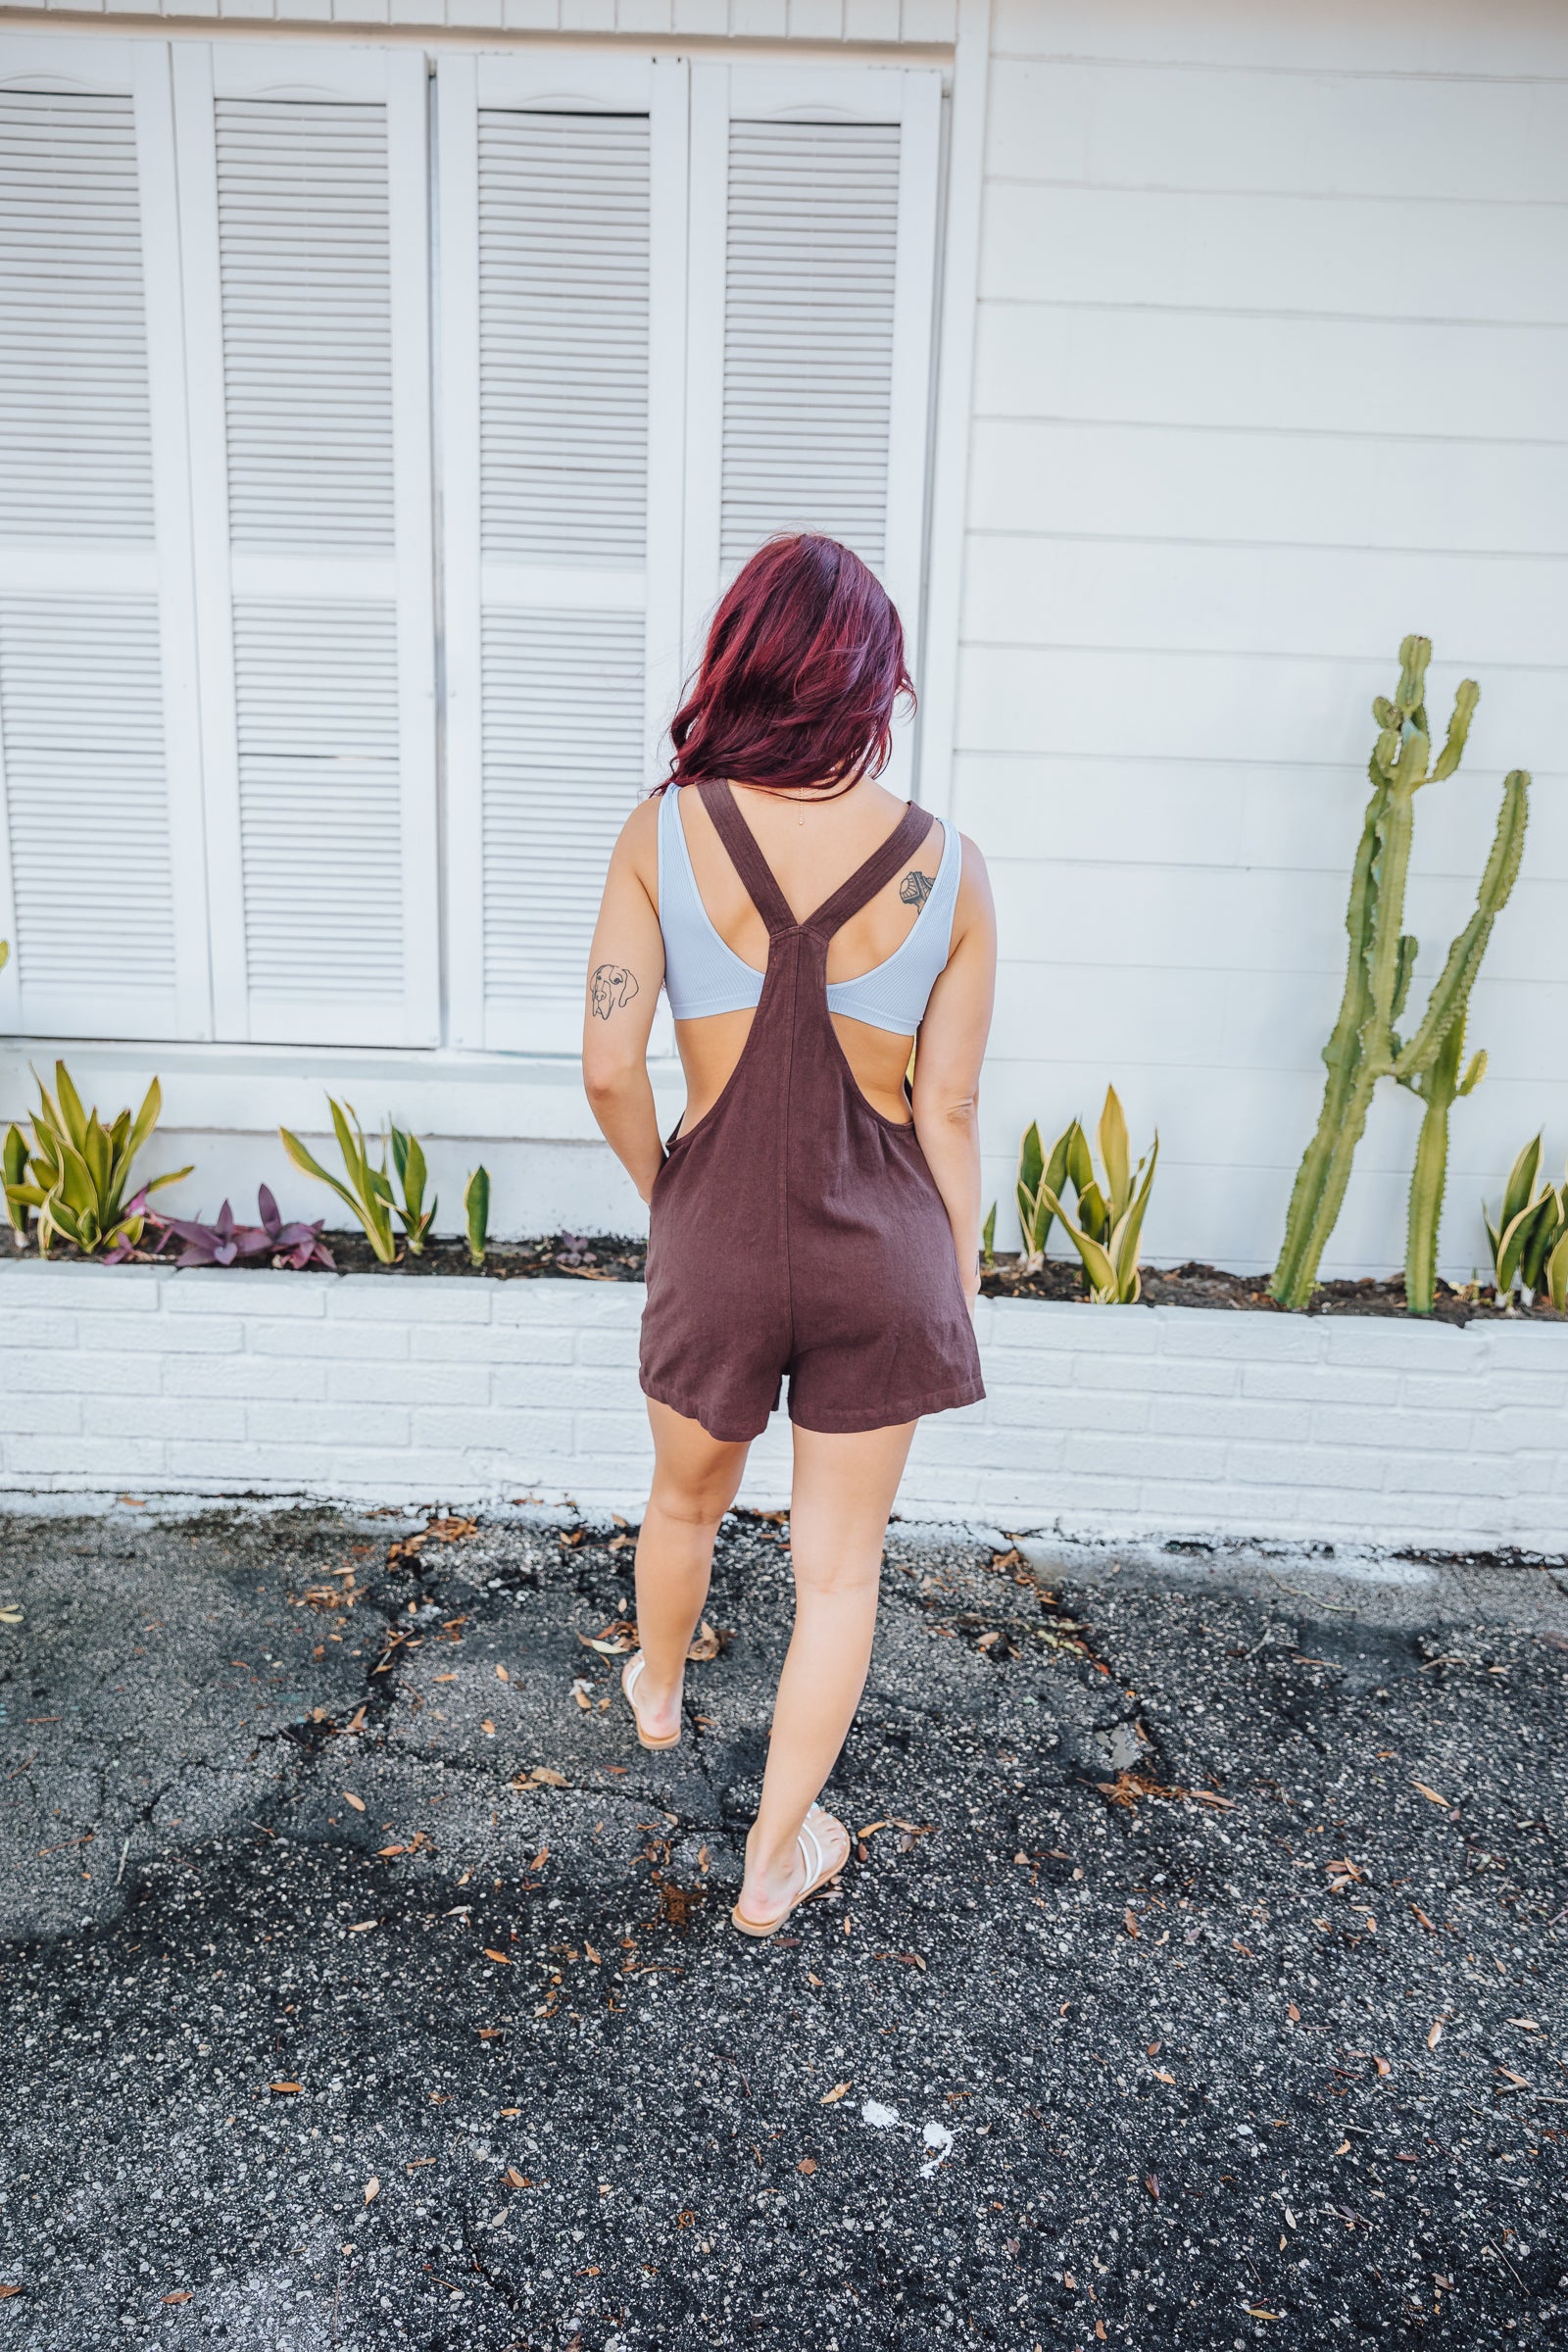 These trendy overalls have small straps that connect as knots to the straight neckline and have pockets along the bottom of the shorts. These brown overalls go perfect as a beach cover up.